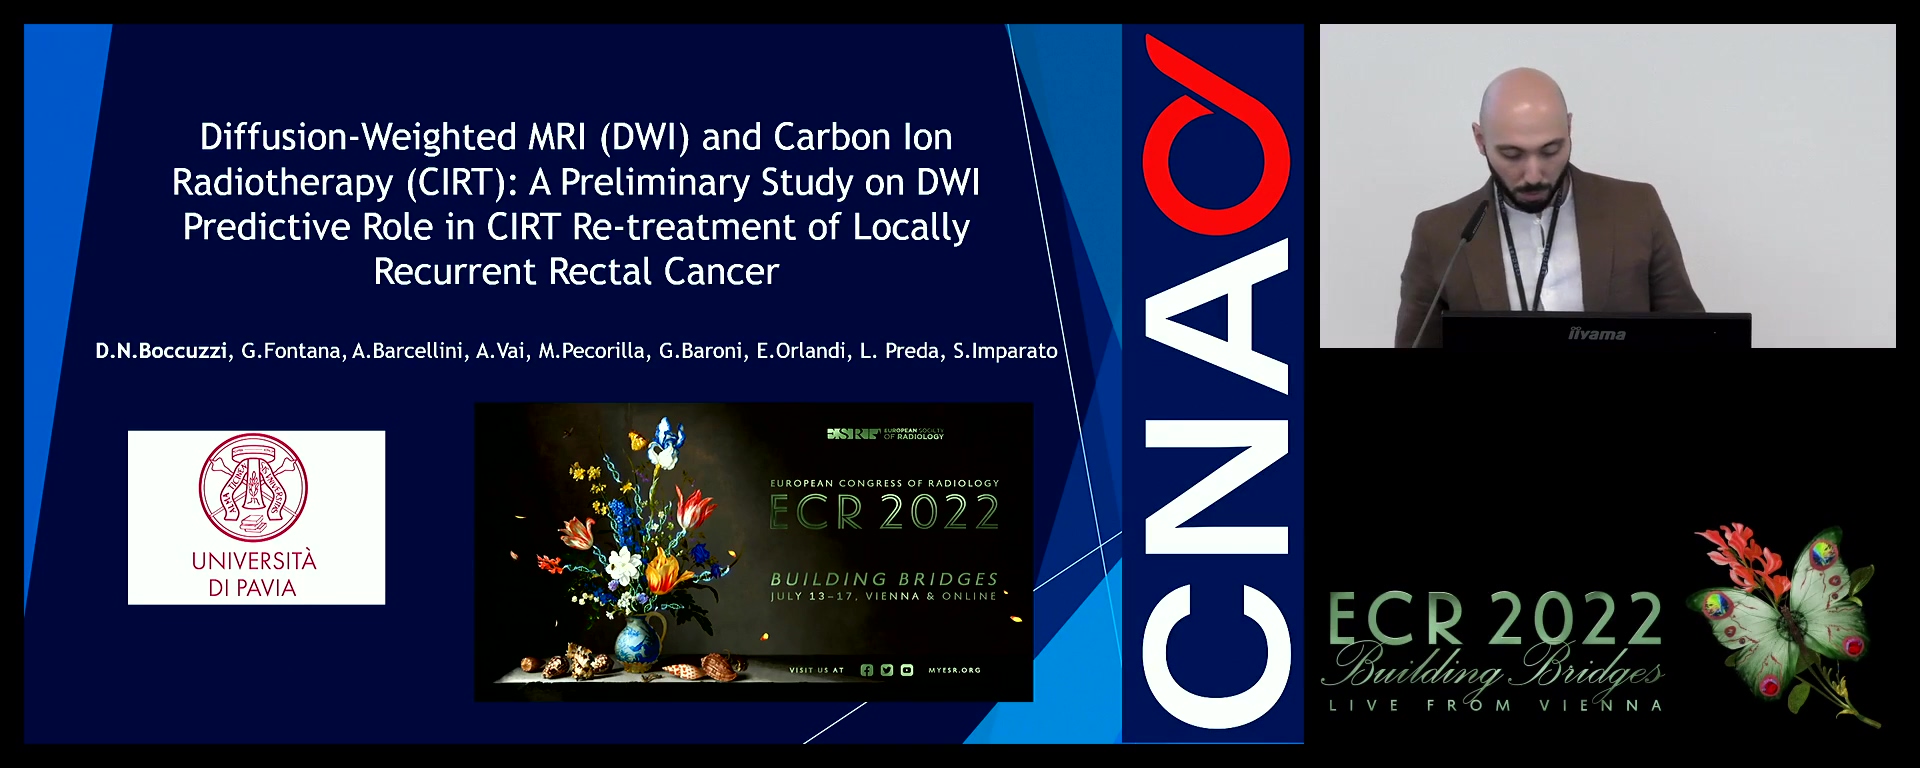 Diffusion weighted MRI (DWI) and carbon ion radiotherapy (CIRT): a preliminary study on DWI predictive role in CIRT re-treatment of locally recurrent rectal cancer - Dario Nicola Boccuzzi, Como / IT